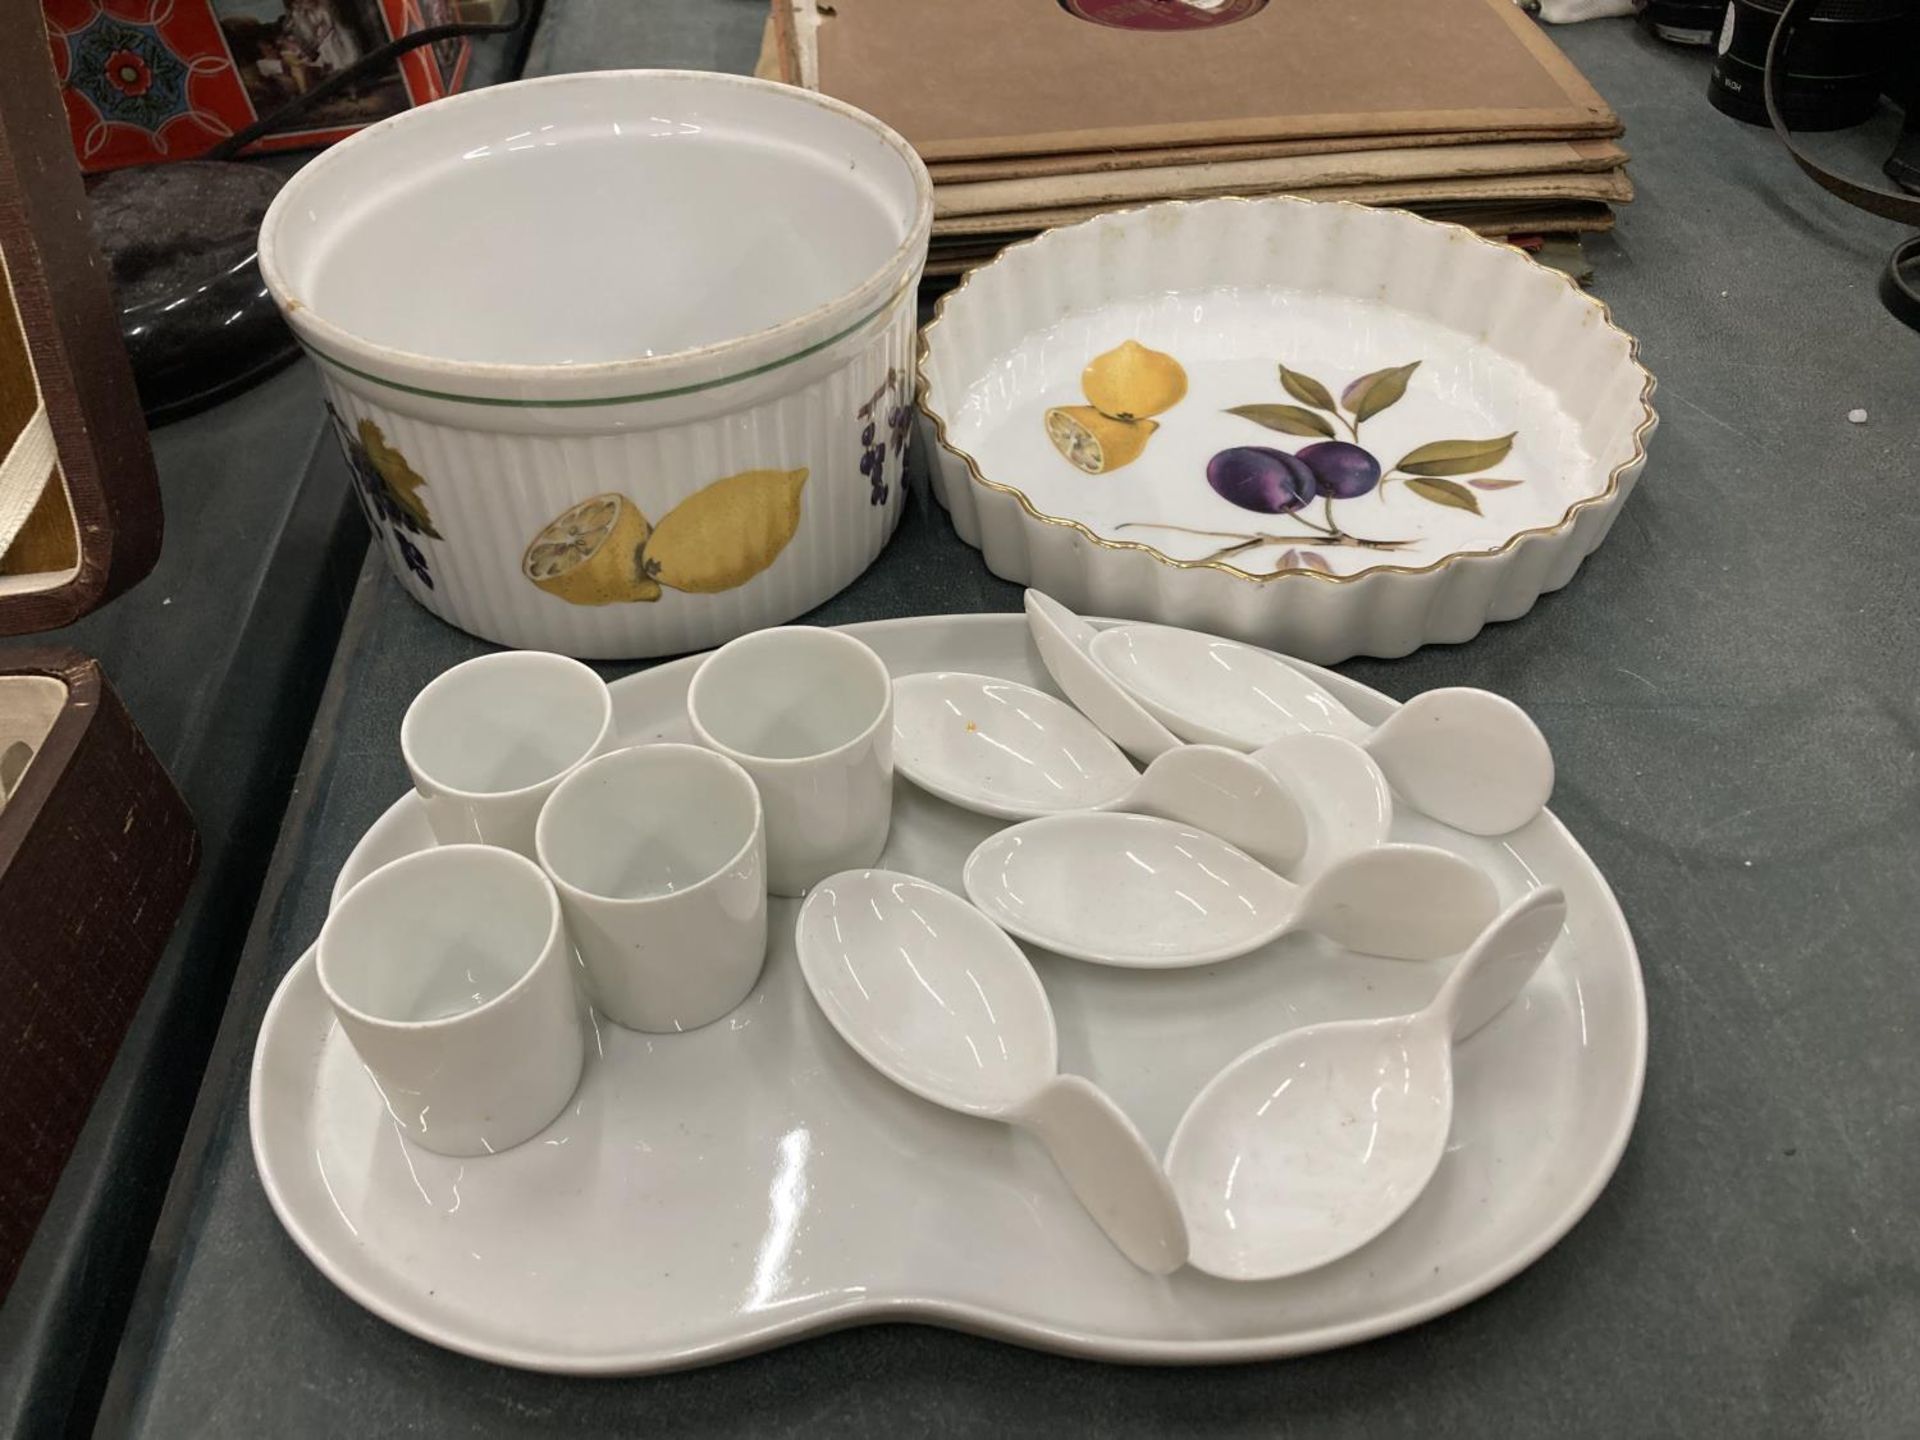 TWO PIECES OF ROYAL WORCESTER 'EVESHAM', PLUS A CERAMIC TRAY WITH EGG CUPS AND QUIRKY SPOONS